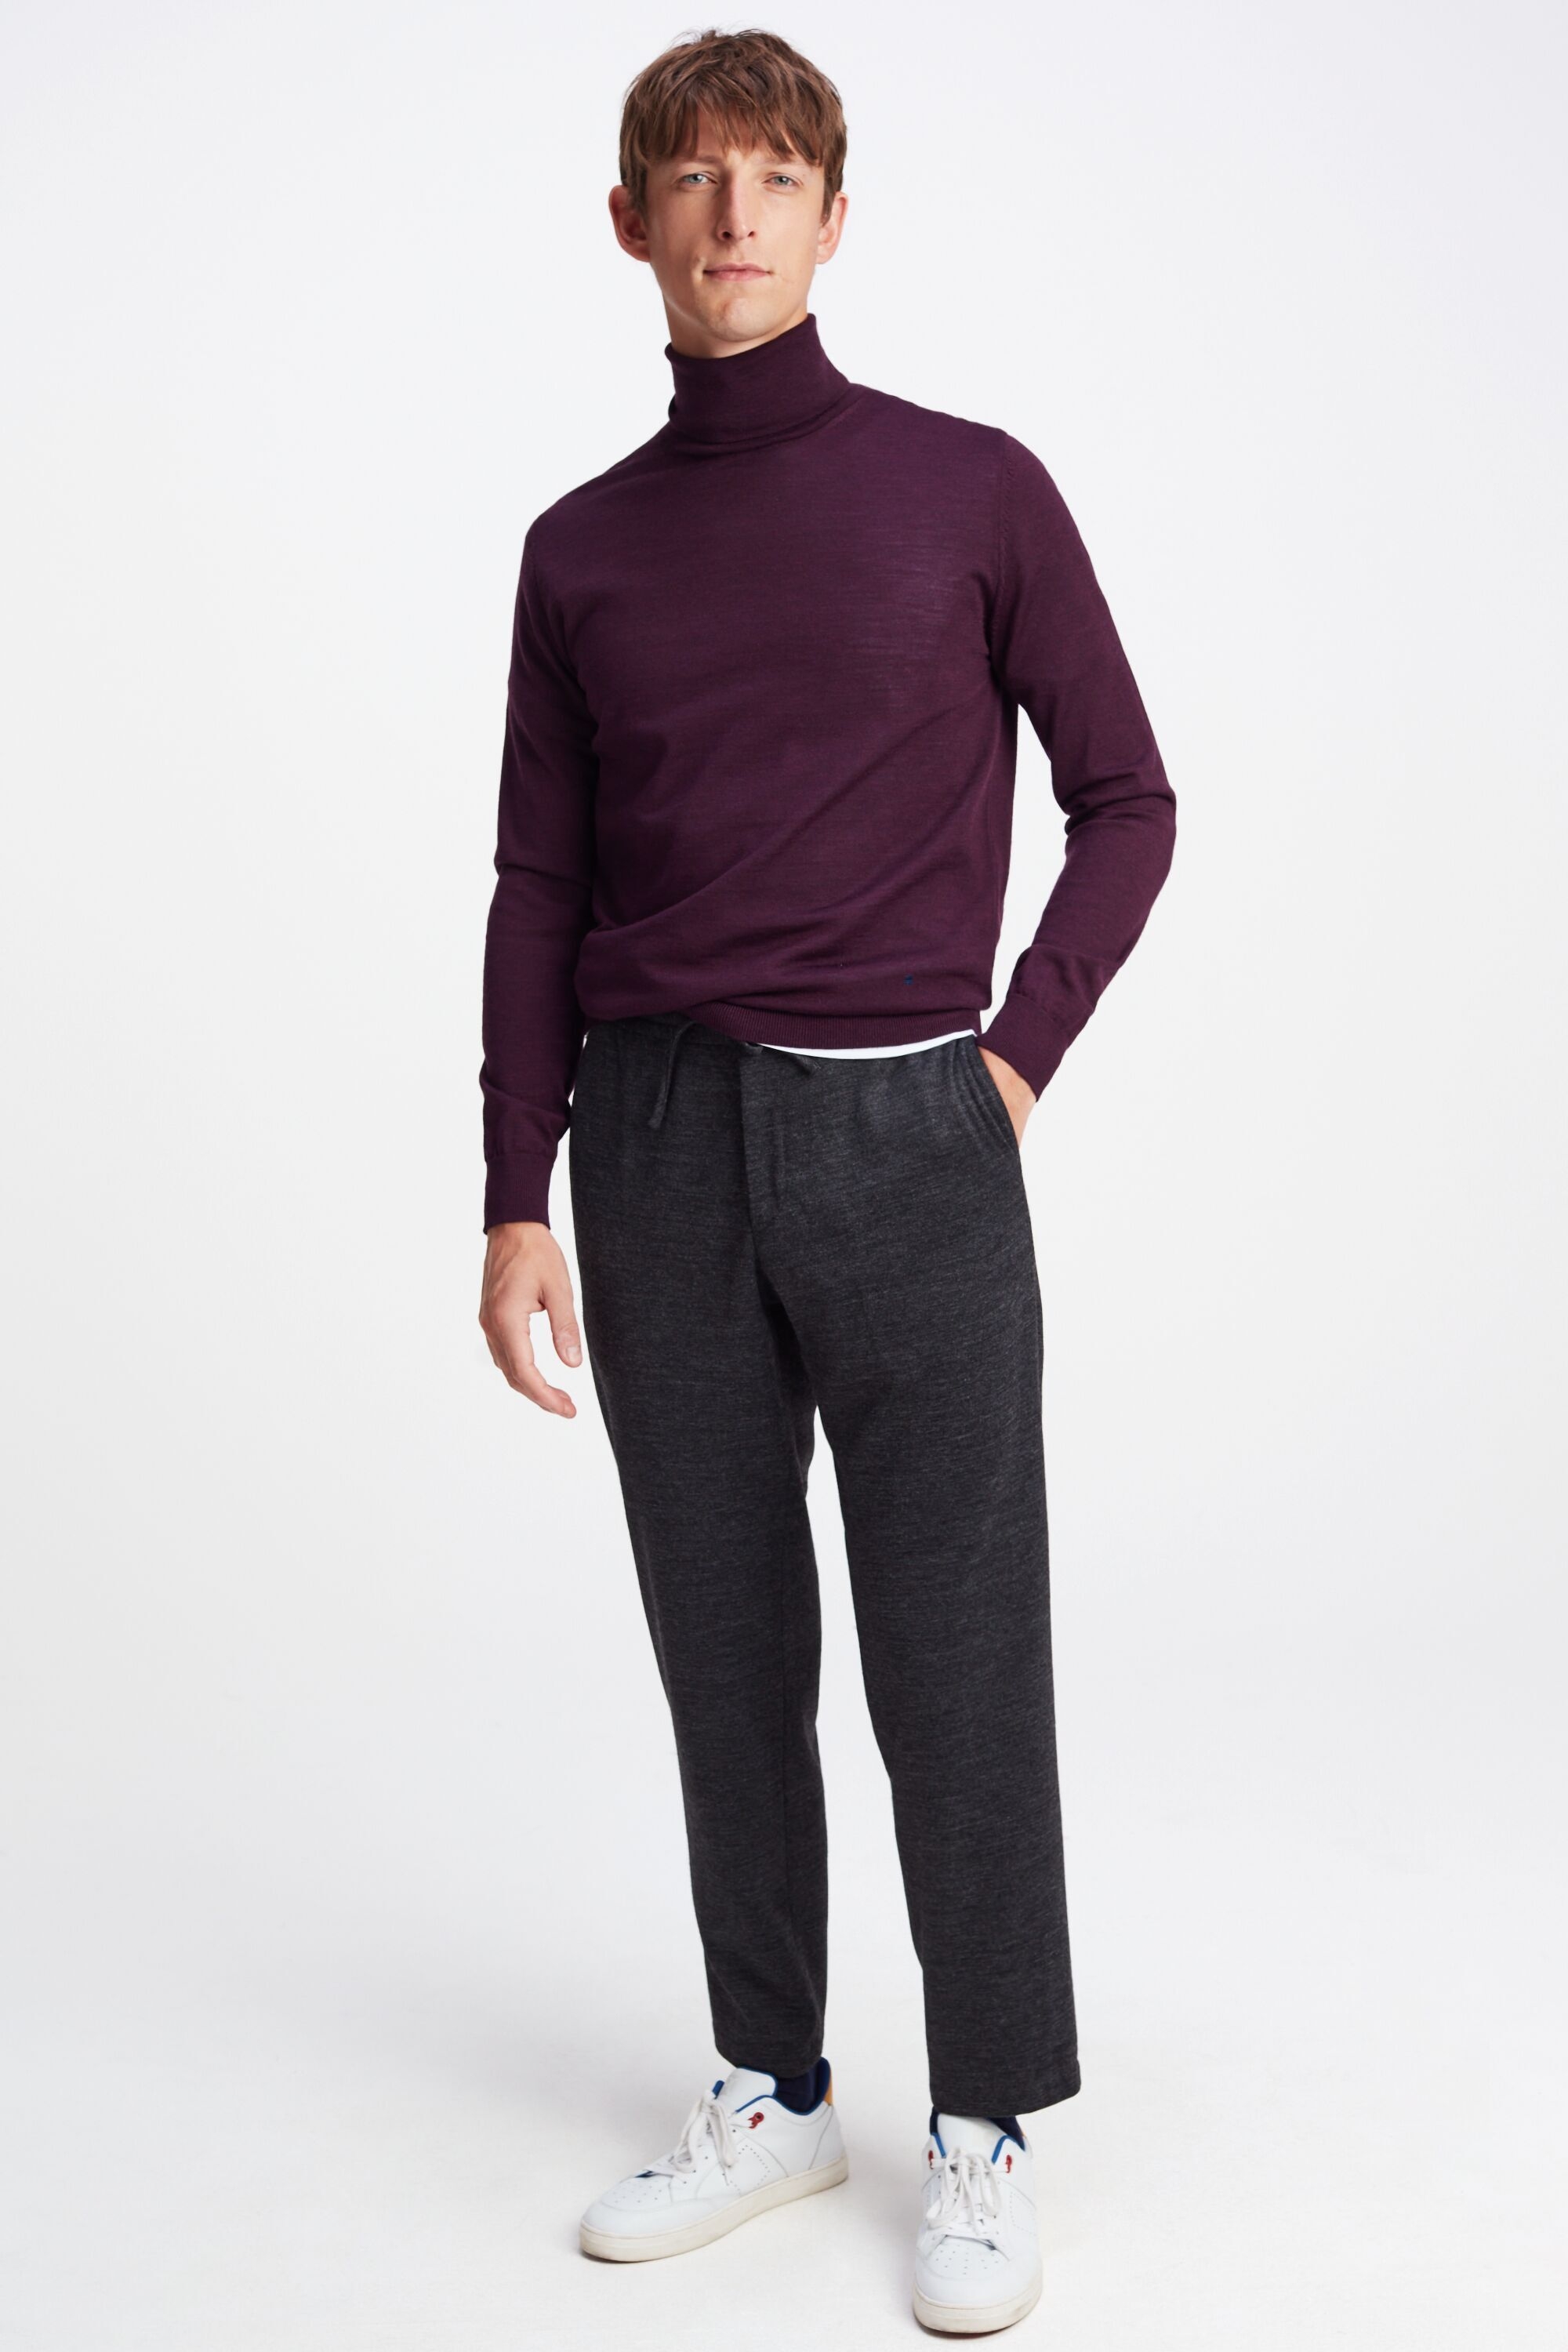 Double-faced knit relaxed fit trousers